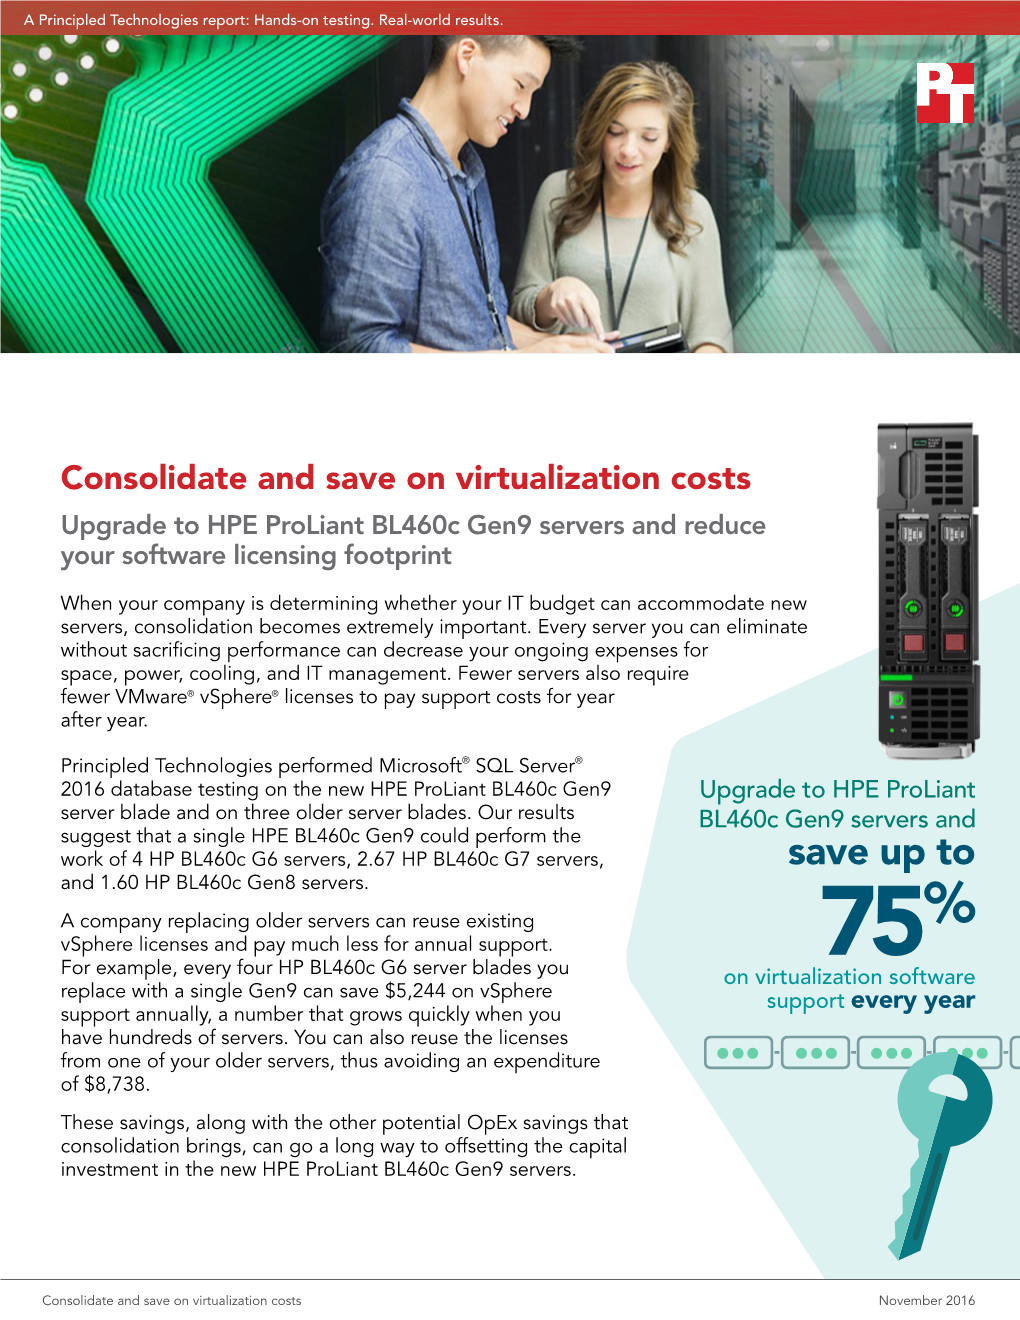 Consolidate and Save on Virtualization Costs Upgrade to HPE Proliant Bl460c Gen9 Servers and Reduce Your Software Licensing Footprint